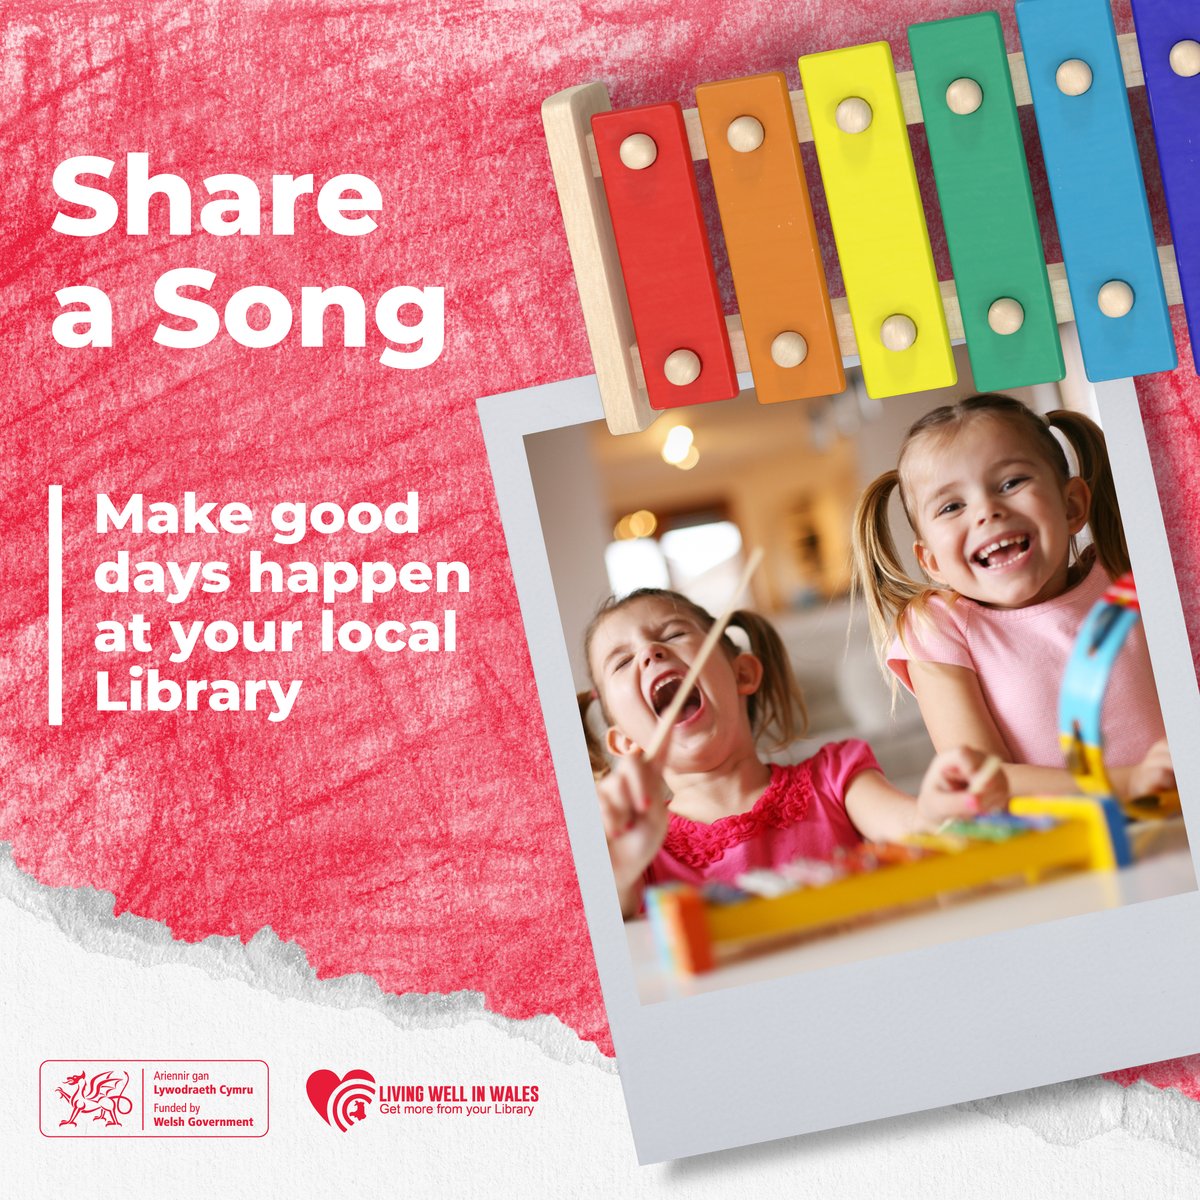 Get moving with rhymes and songs for everyone to join in – you’ll find some familiar tunes learn lots of new favourites together! Take a look at the events and activities available through your local library